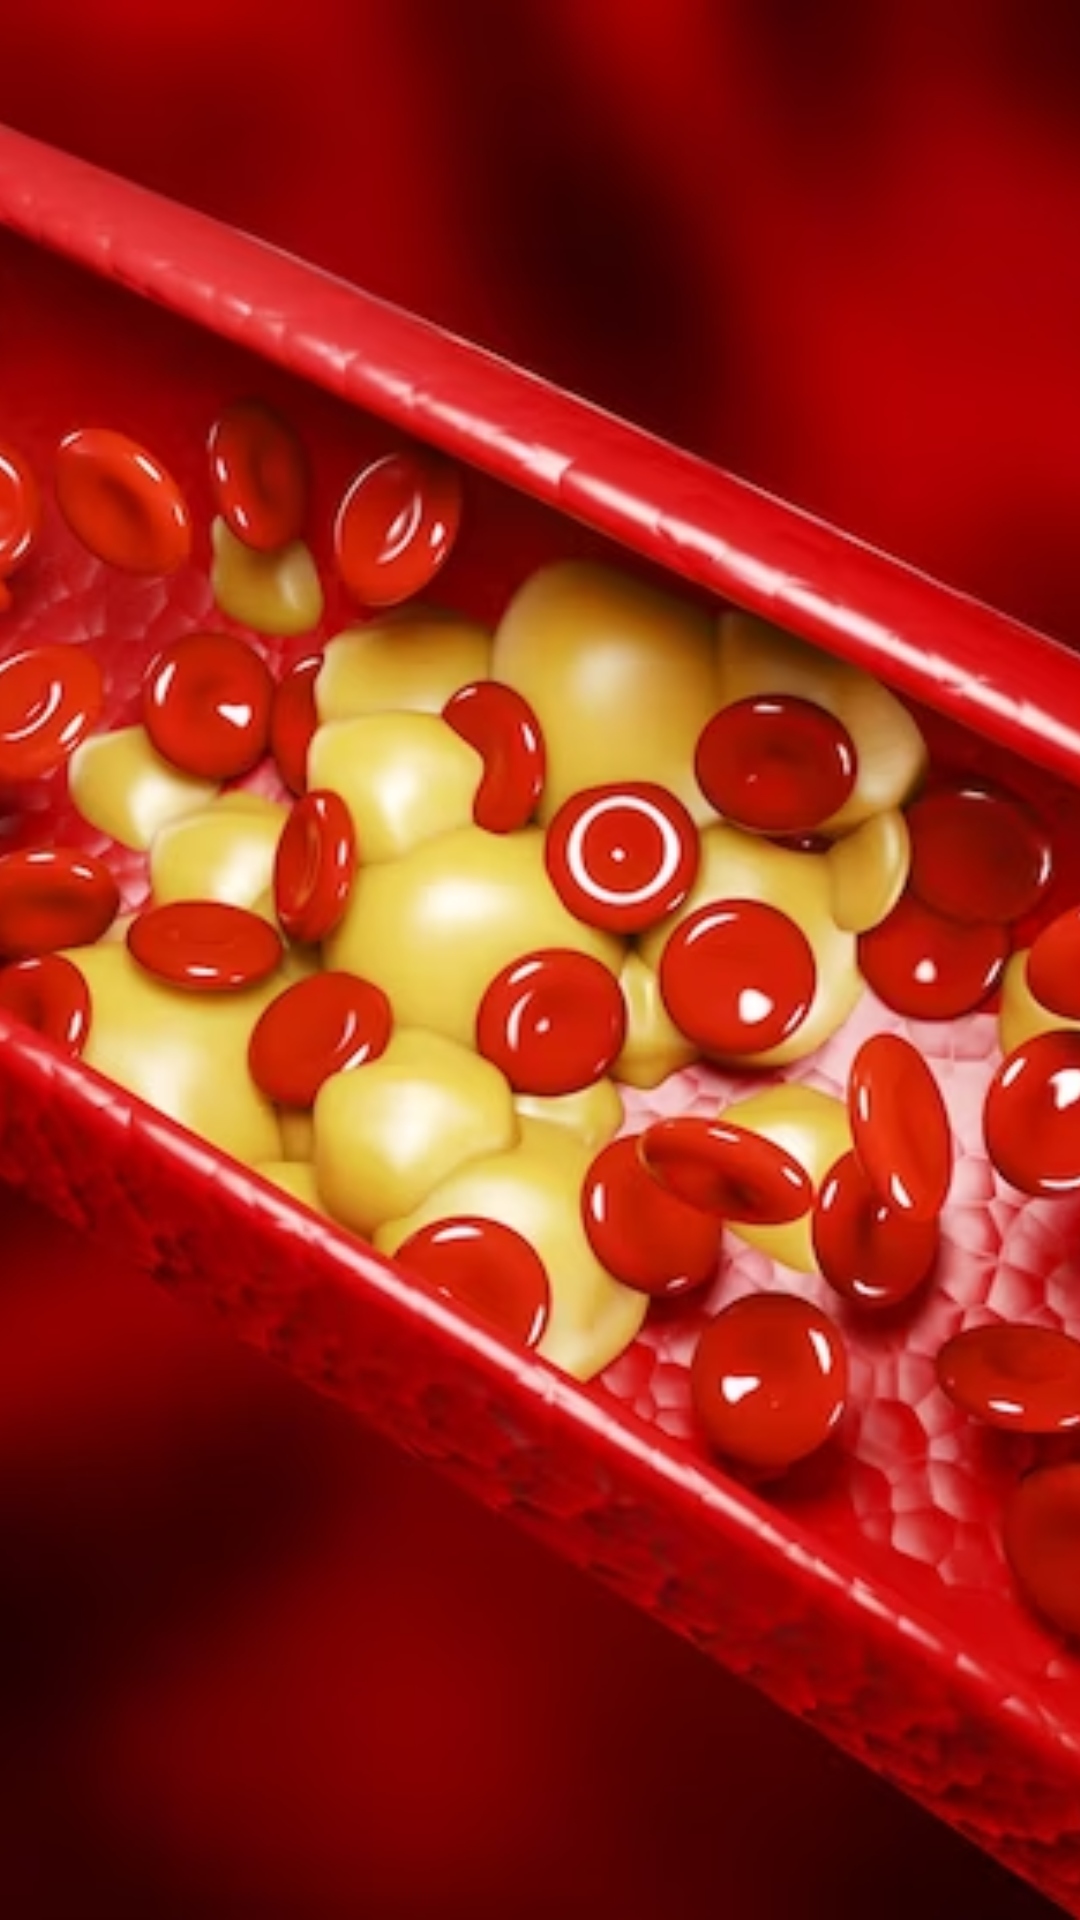 8 types of foods that give us bad cholesterol